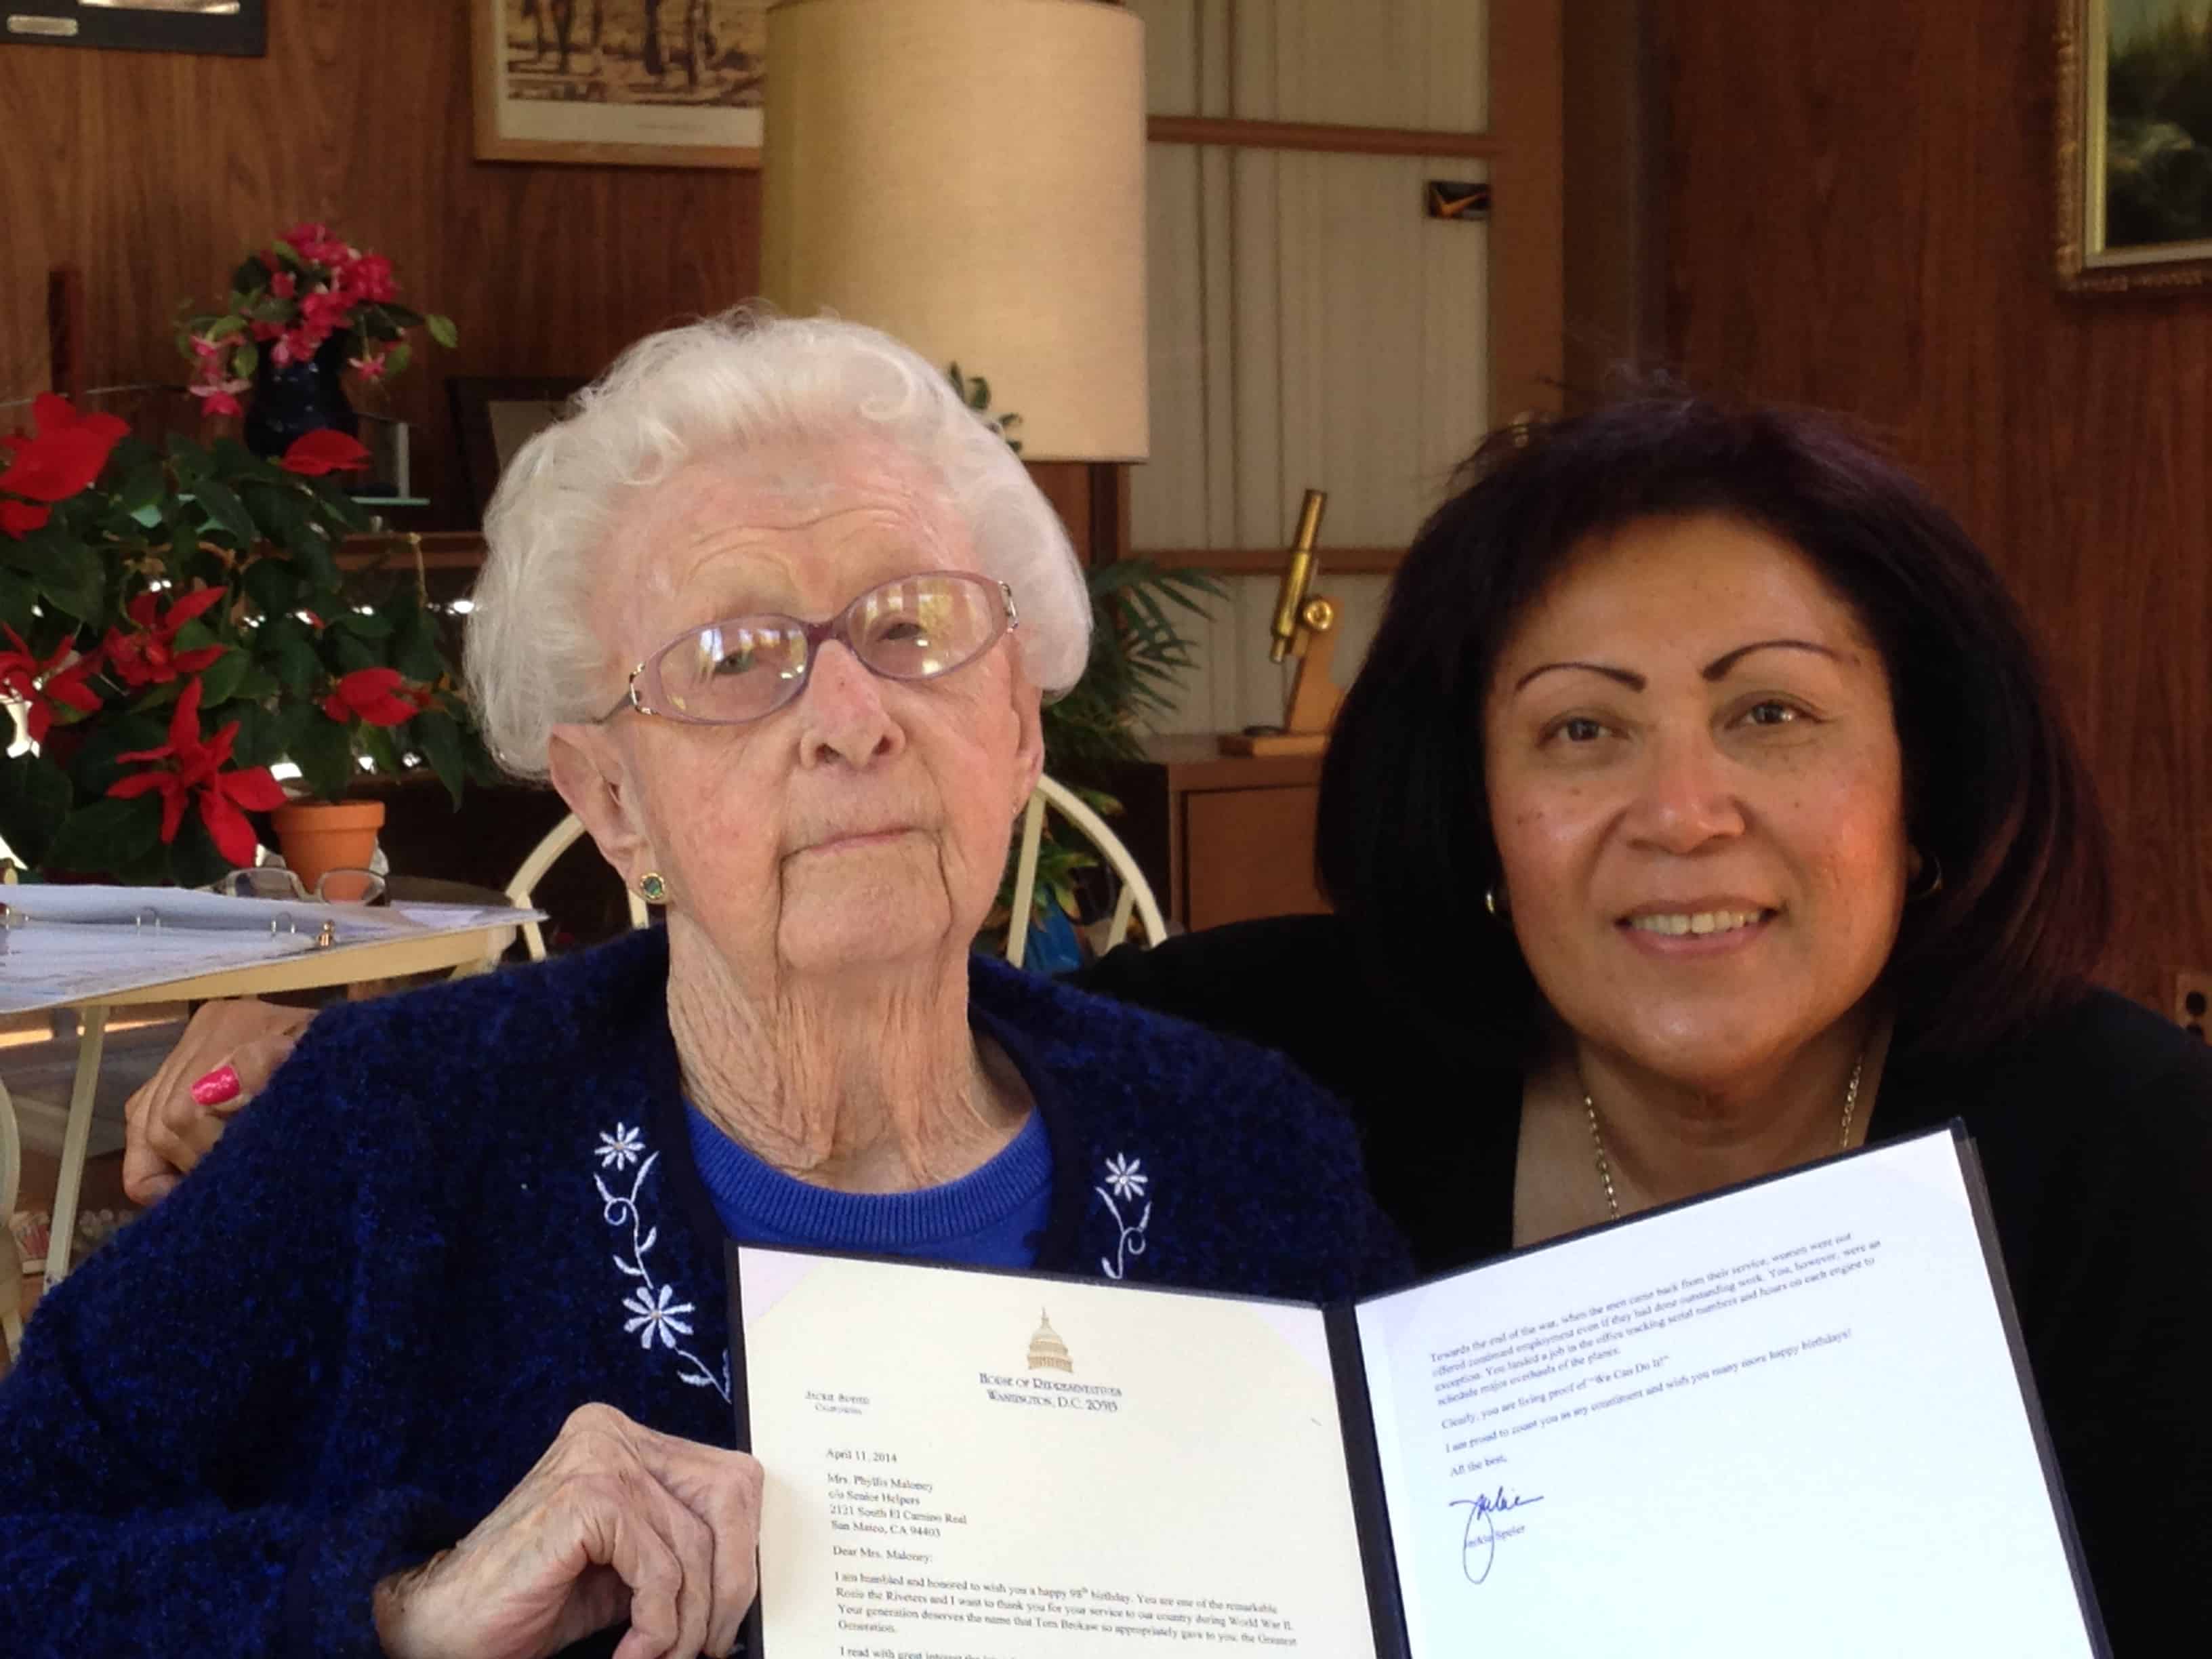 One of our clients, Phyllis, was recognized by our US representative to congress (Jackie Speier) for her work on airplanes during WWII. Phyllis is holding the official letter, on stationary from the US House of Representativesalong with her caregiver, Pafia.